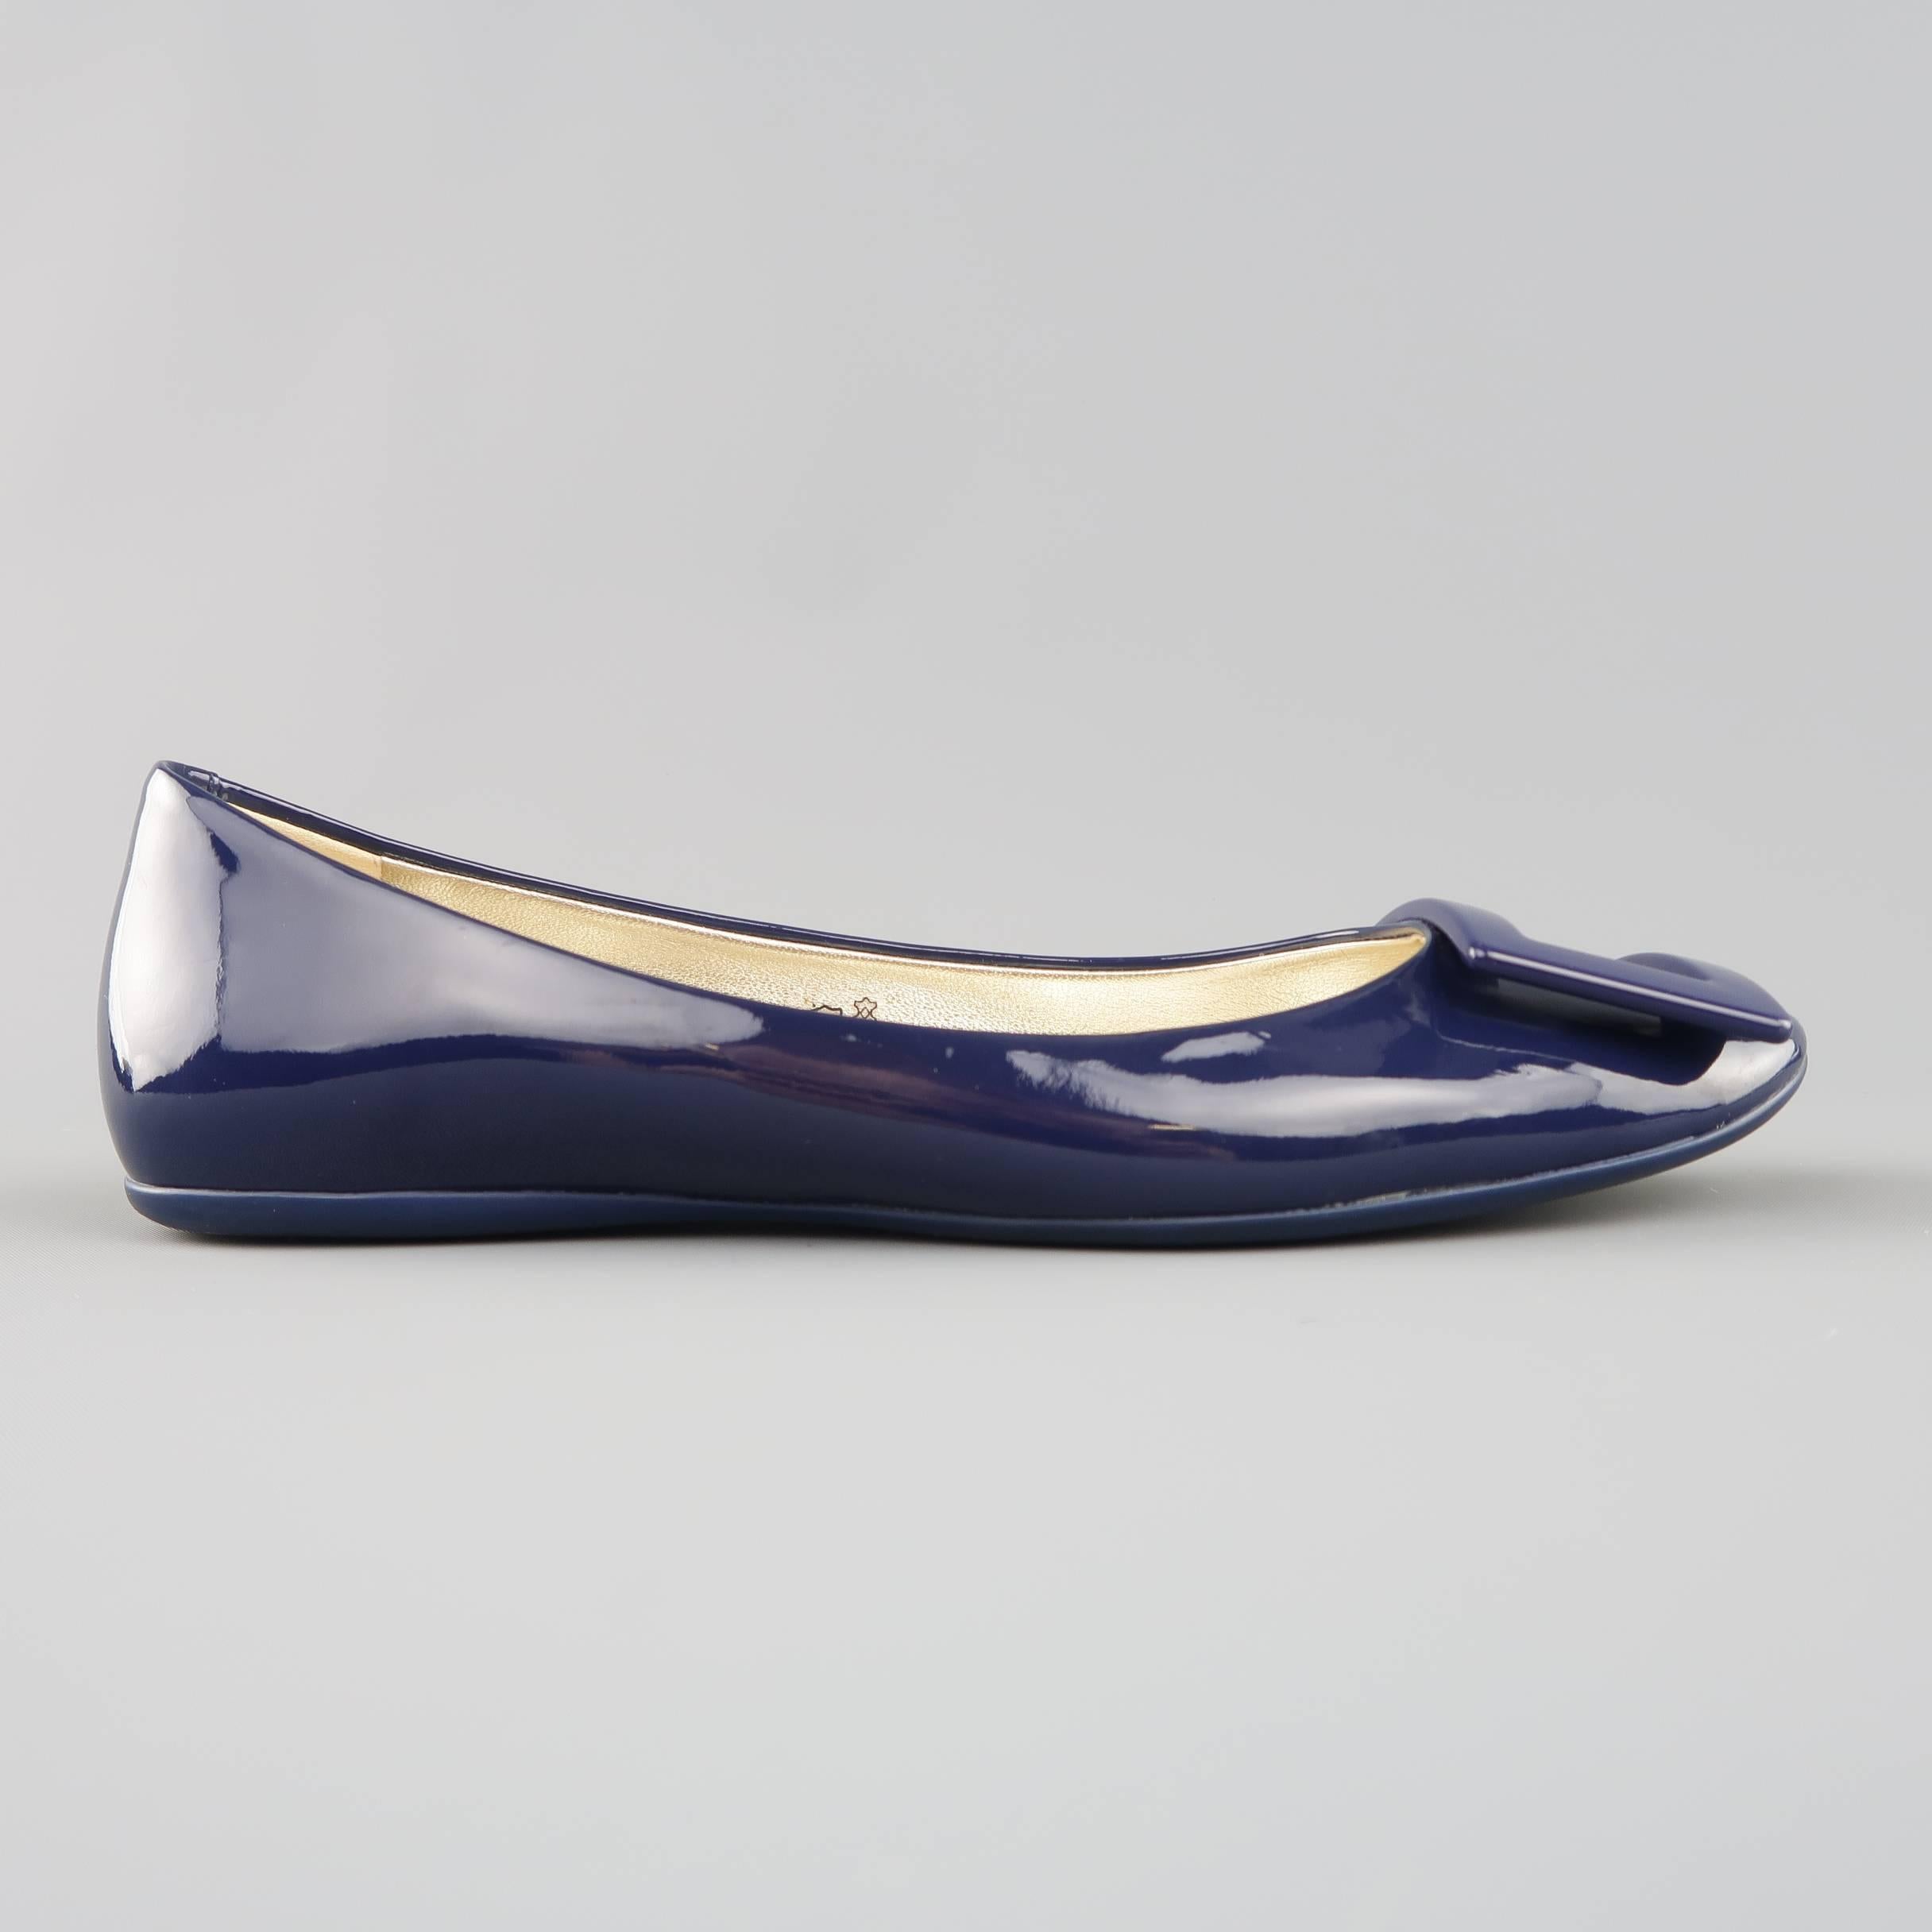 ROGER VIVIER Gommette ballet flats come in glossy patent leather and feature metallic gold leather lining, rubber sole, and oversized engraved buckle. Made in Italy.
 
Excellent Pre-Owned Condition.
Marked: IT 37.5
 
Outsole: 10 x 3 in.

SKU: 83380